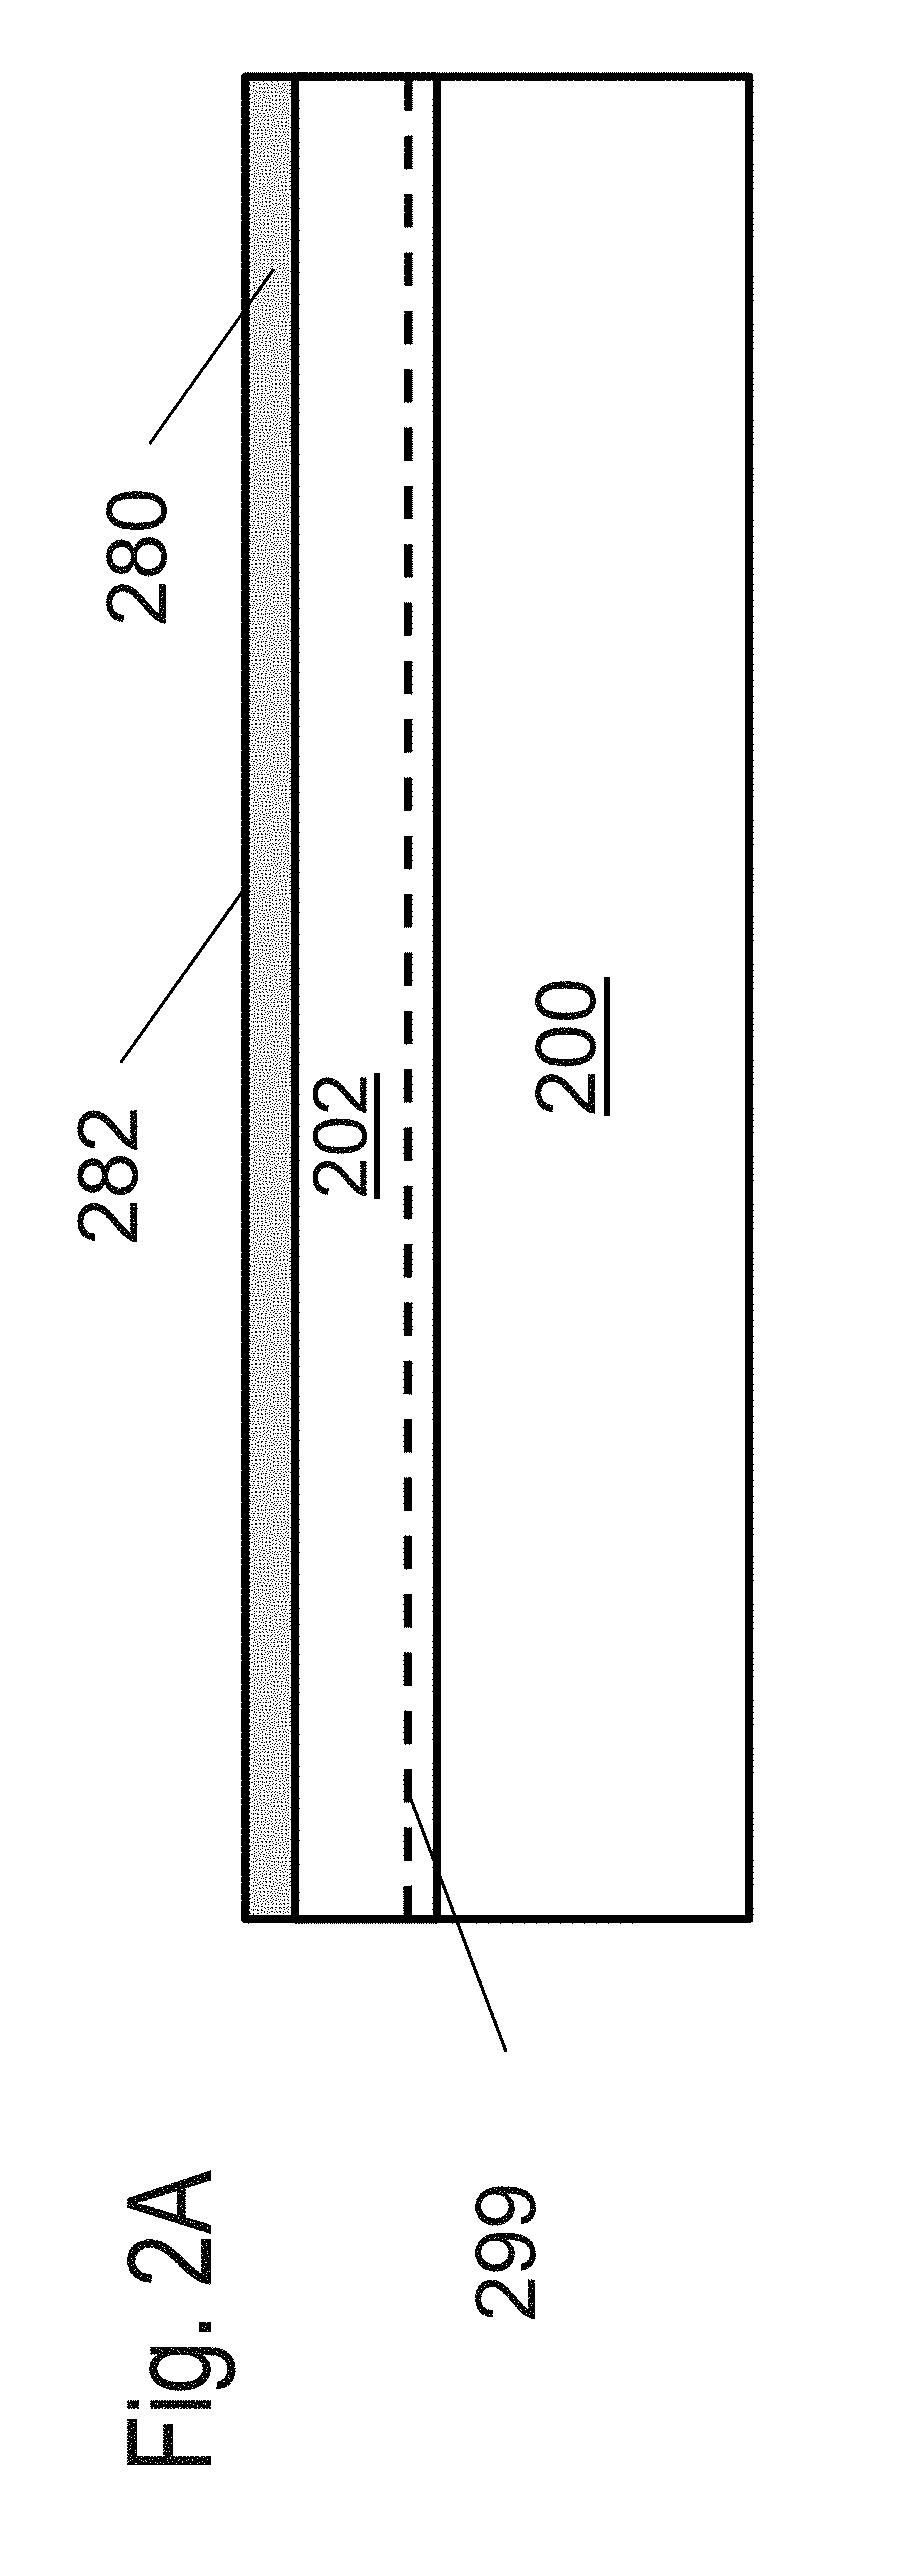 3D semiconductor device and structure